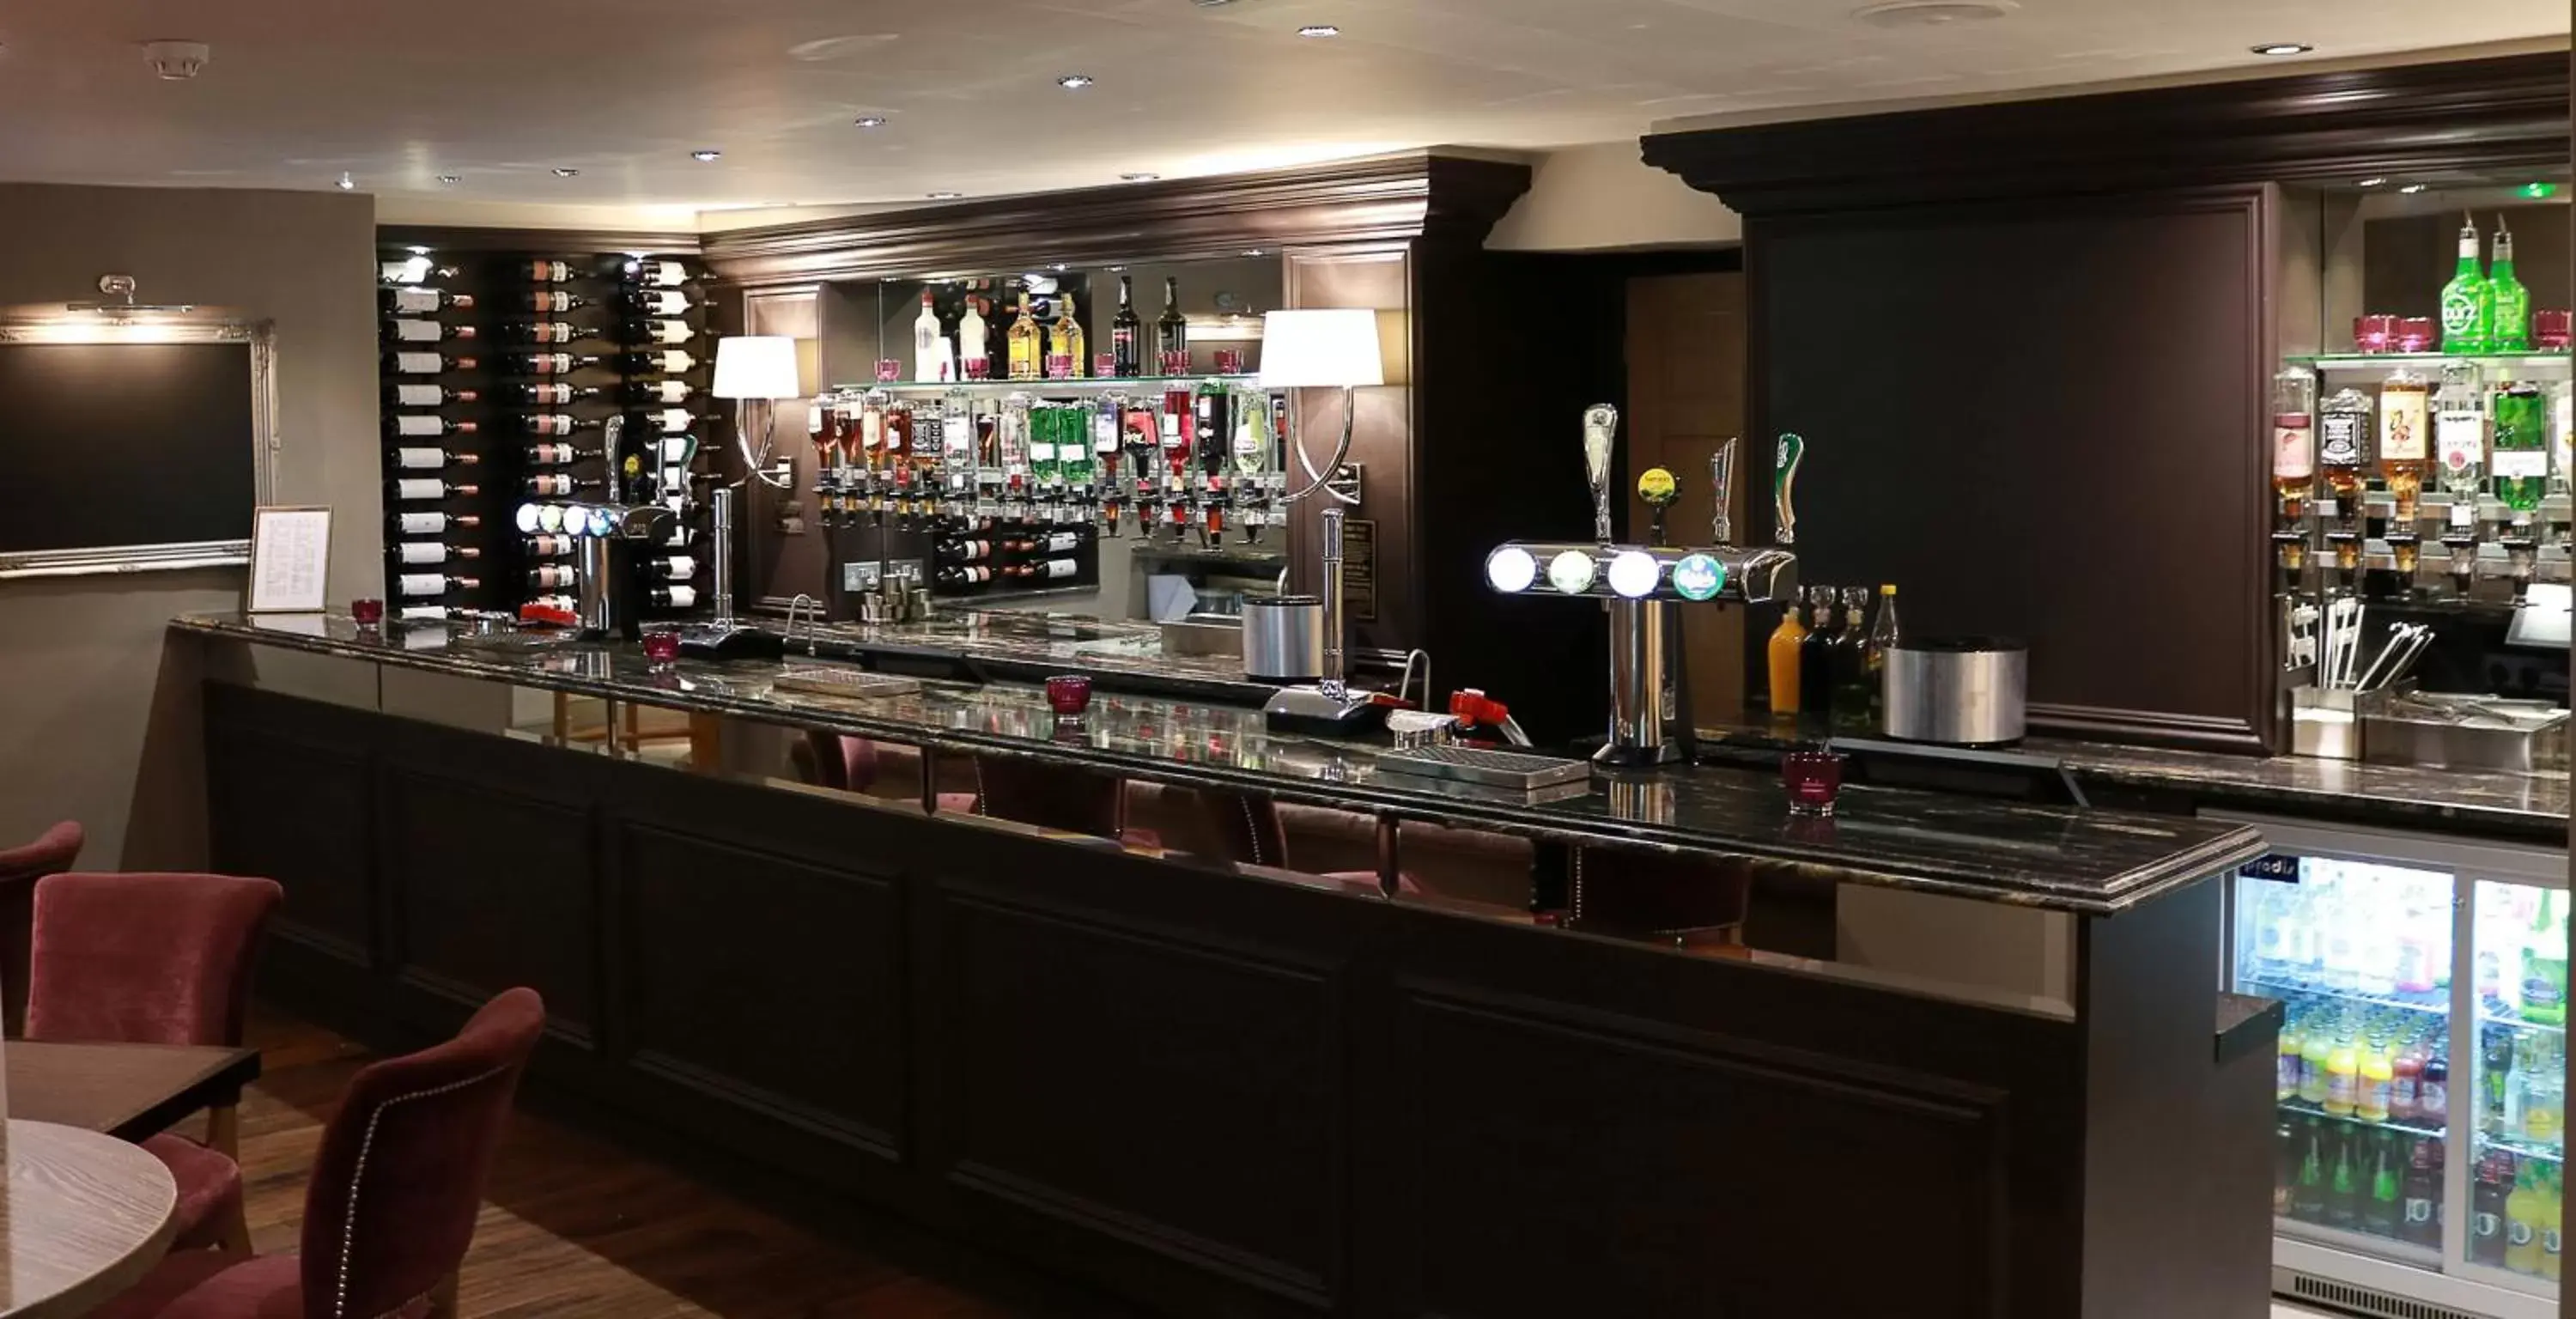 Banquet/Function facilities, Lounge/Bar in The Swan Hotel, Wells, Somerset